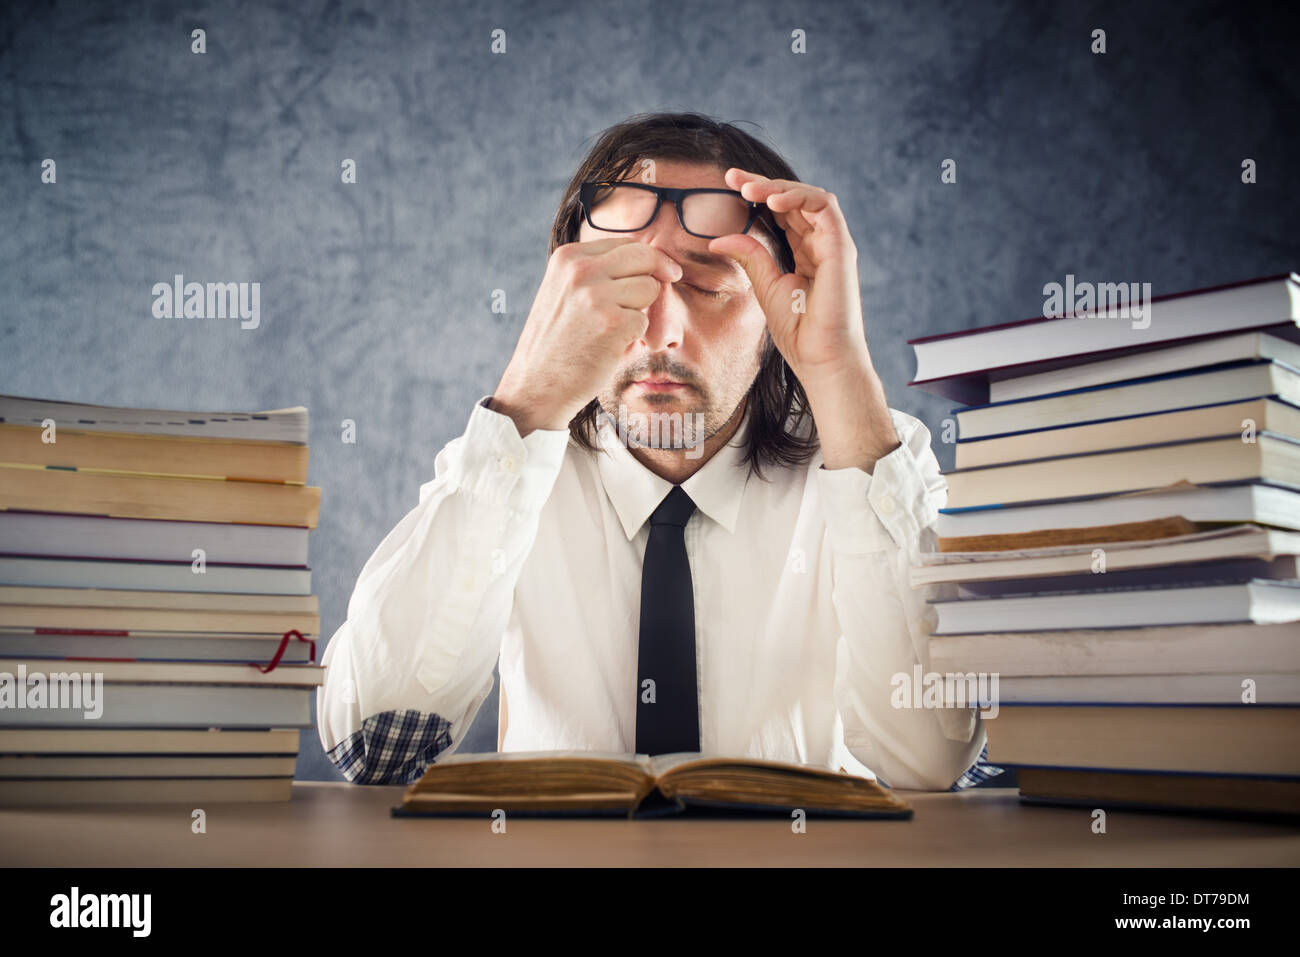 Exhausted man reading books at office desk Stock Photo